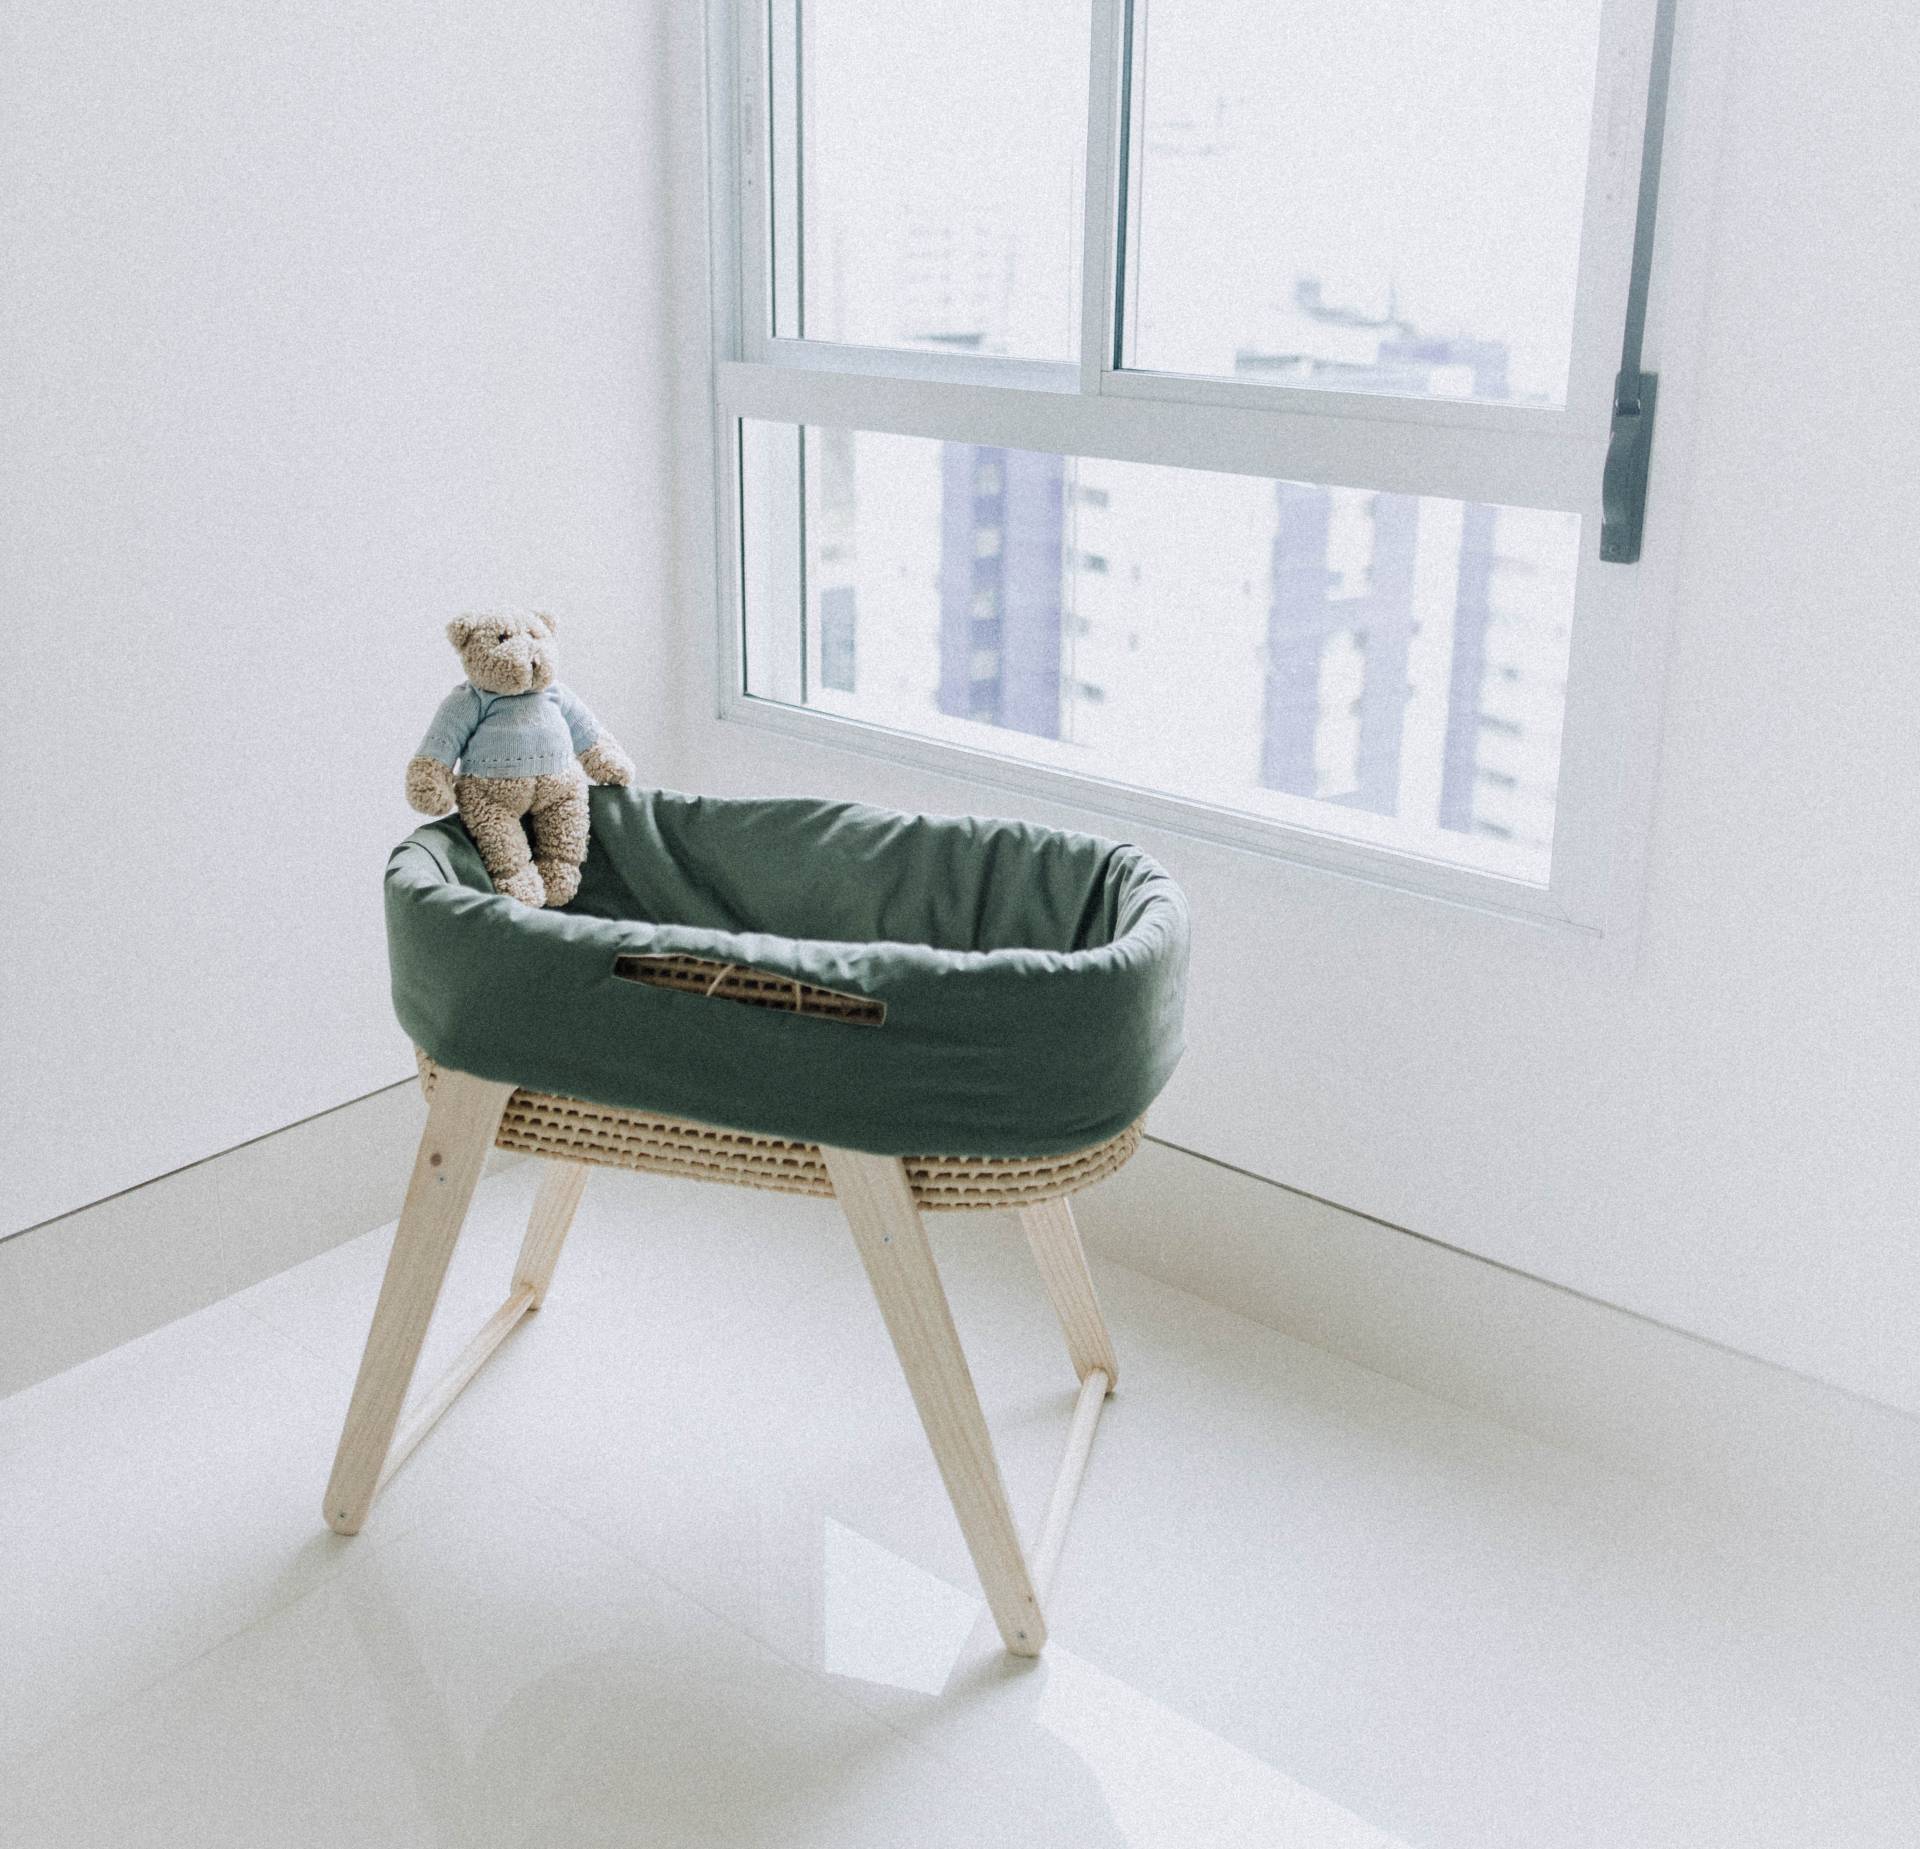 Baby crib in middle of white room